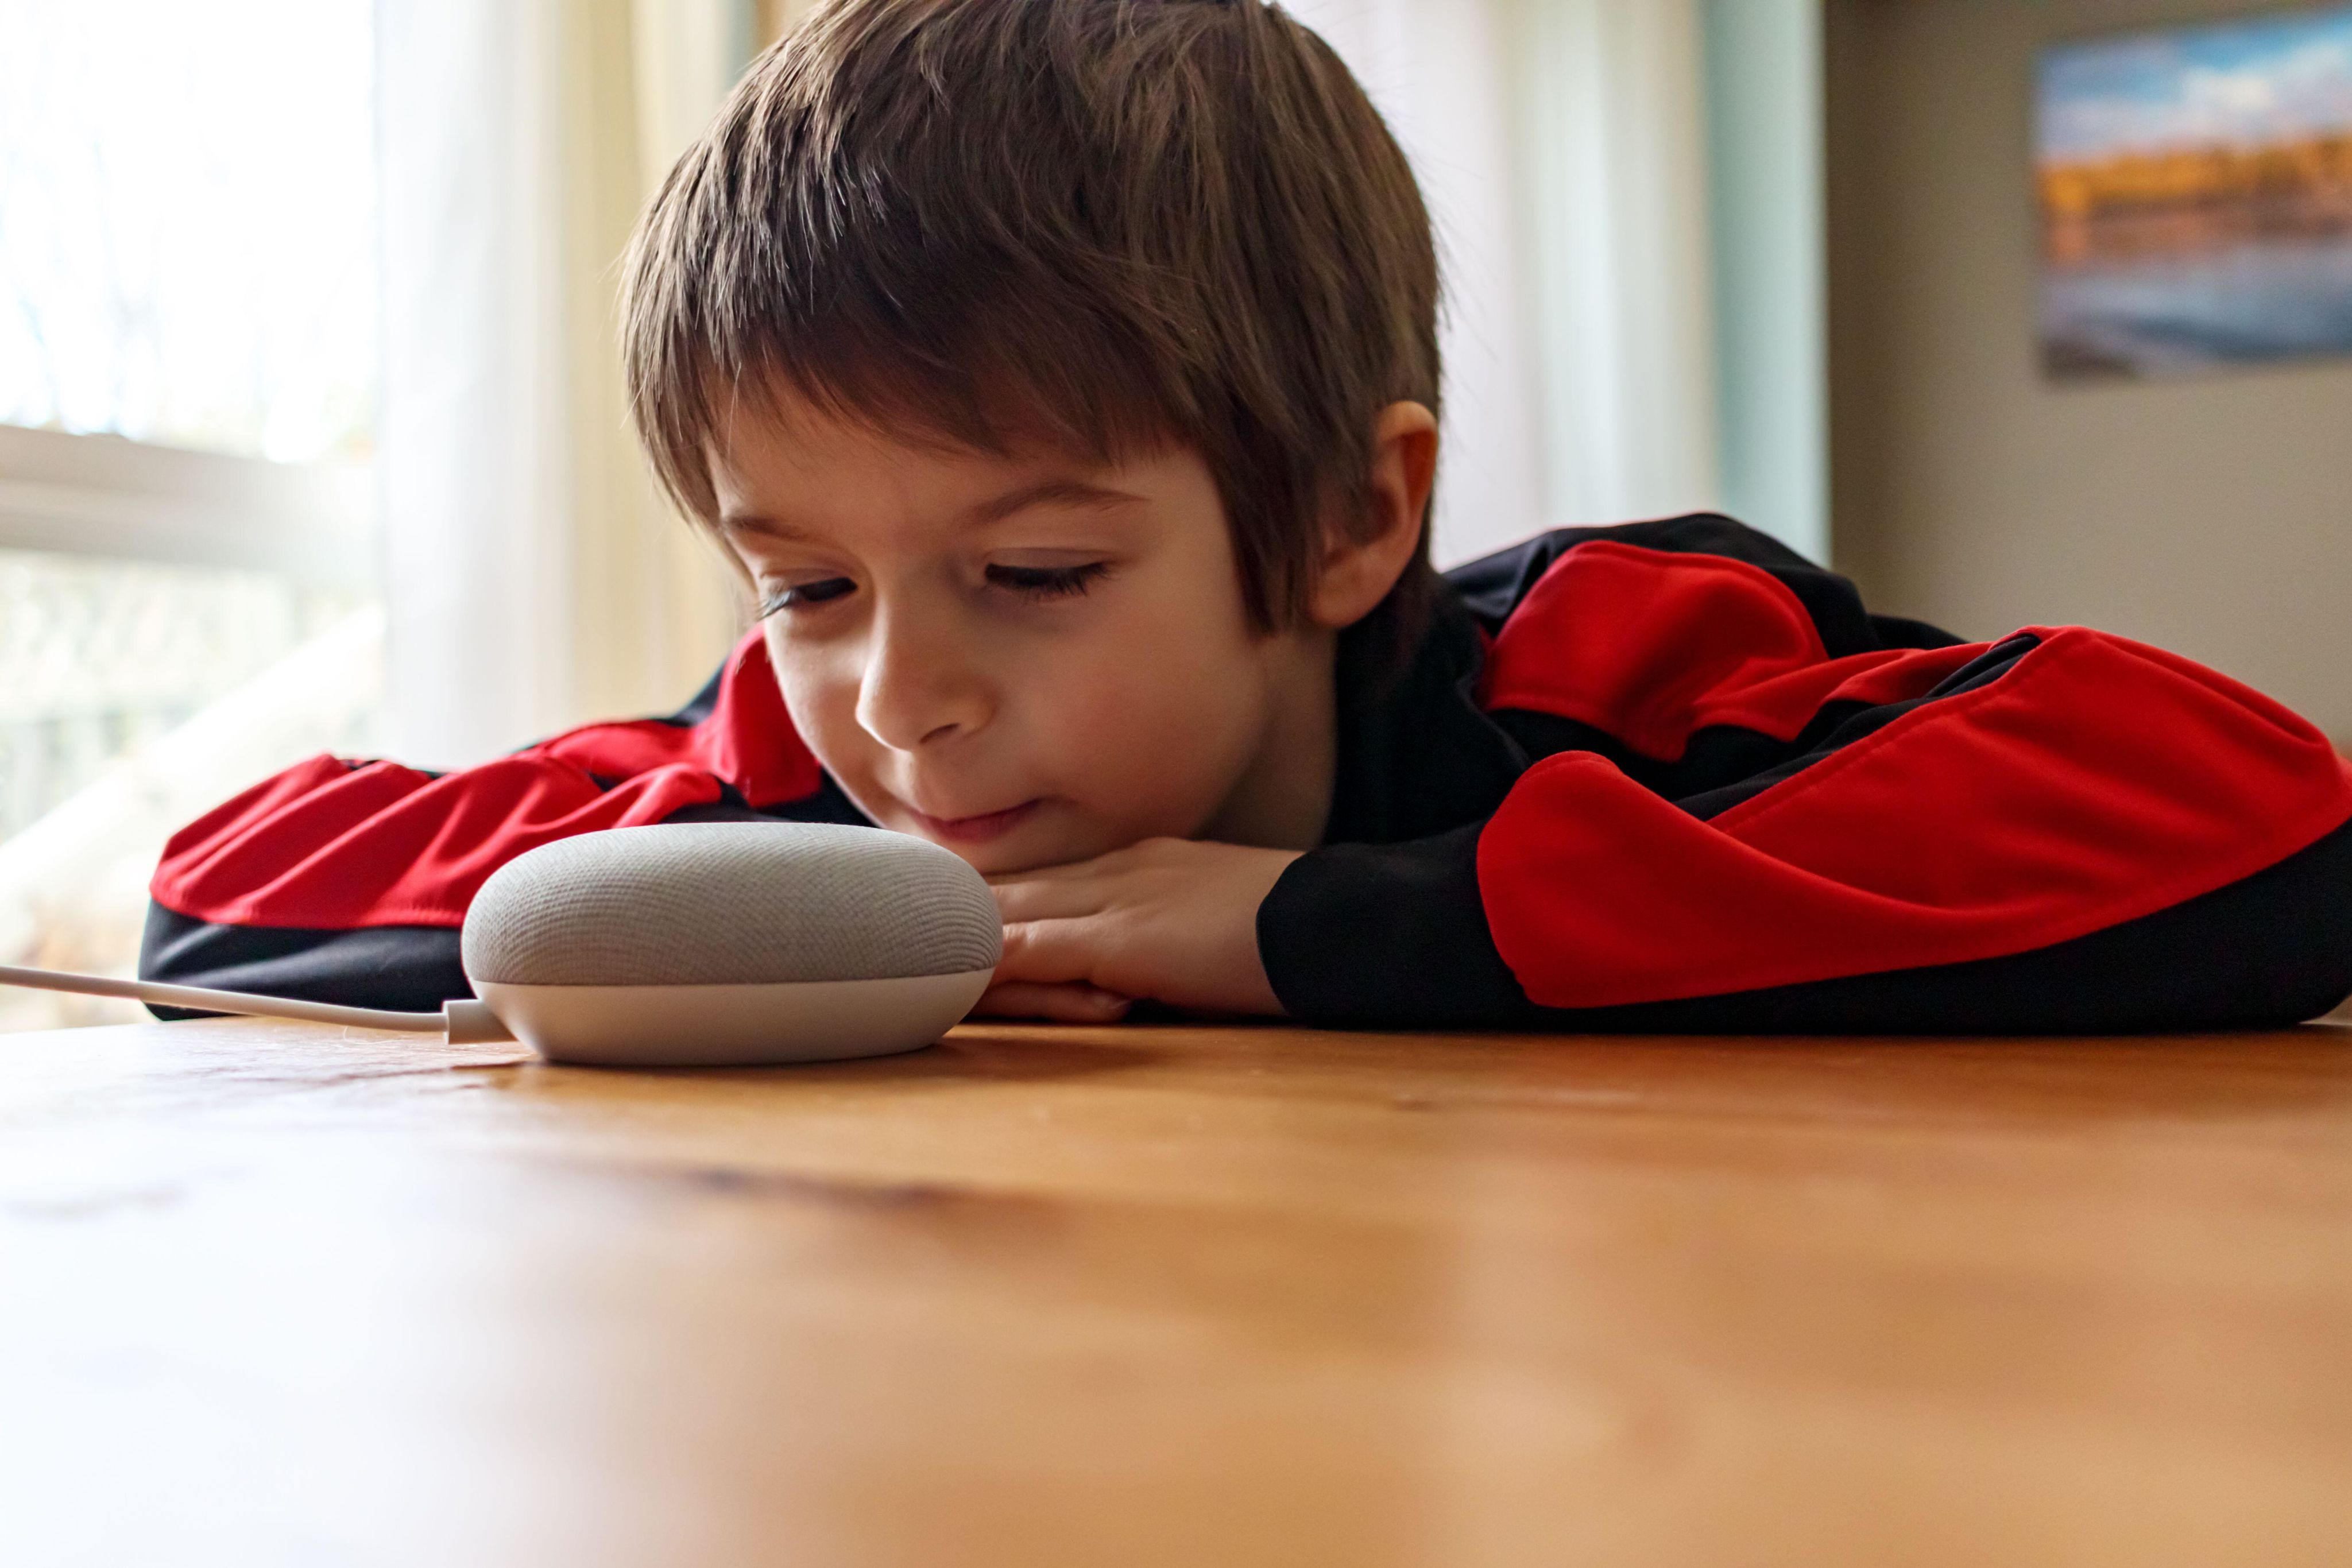 Young child using a smart speaker